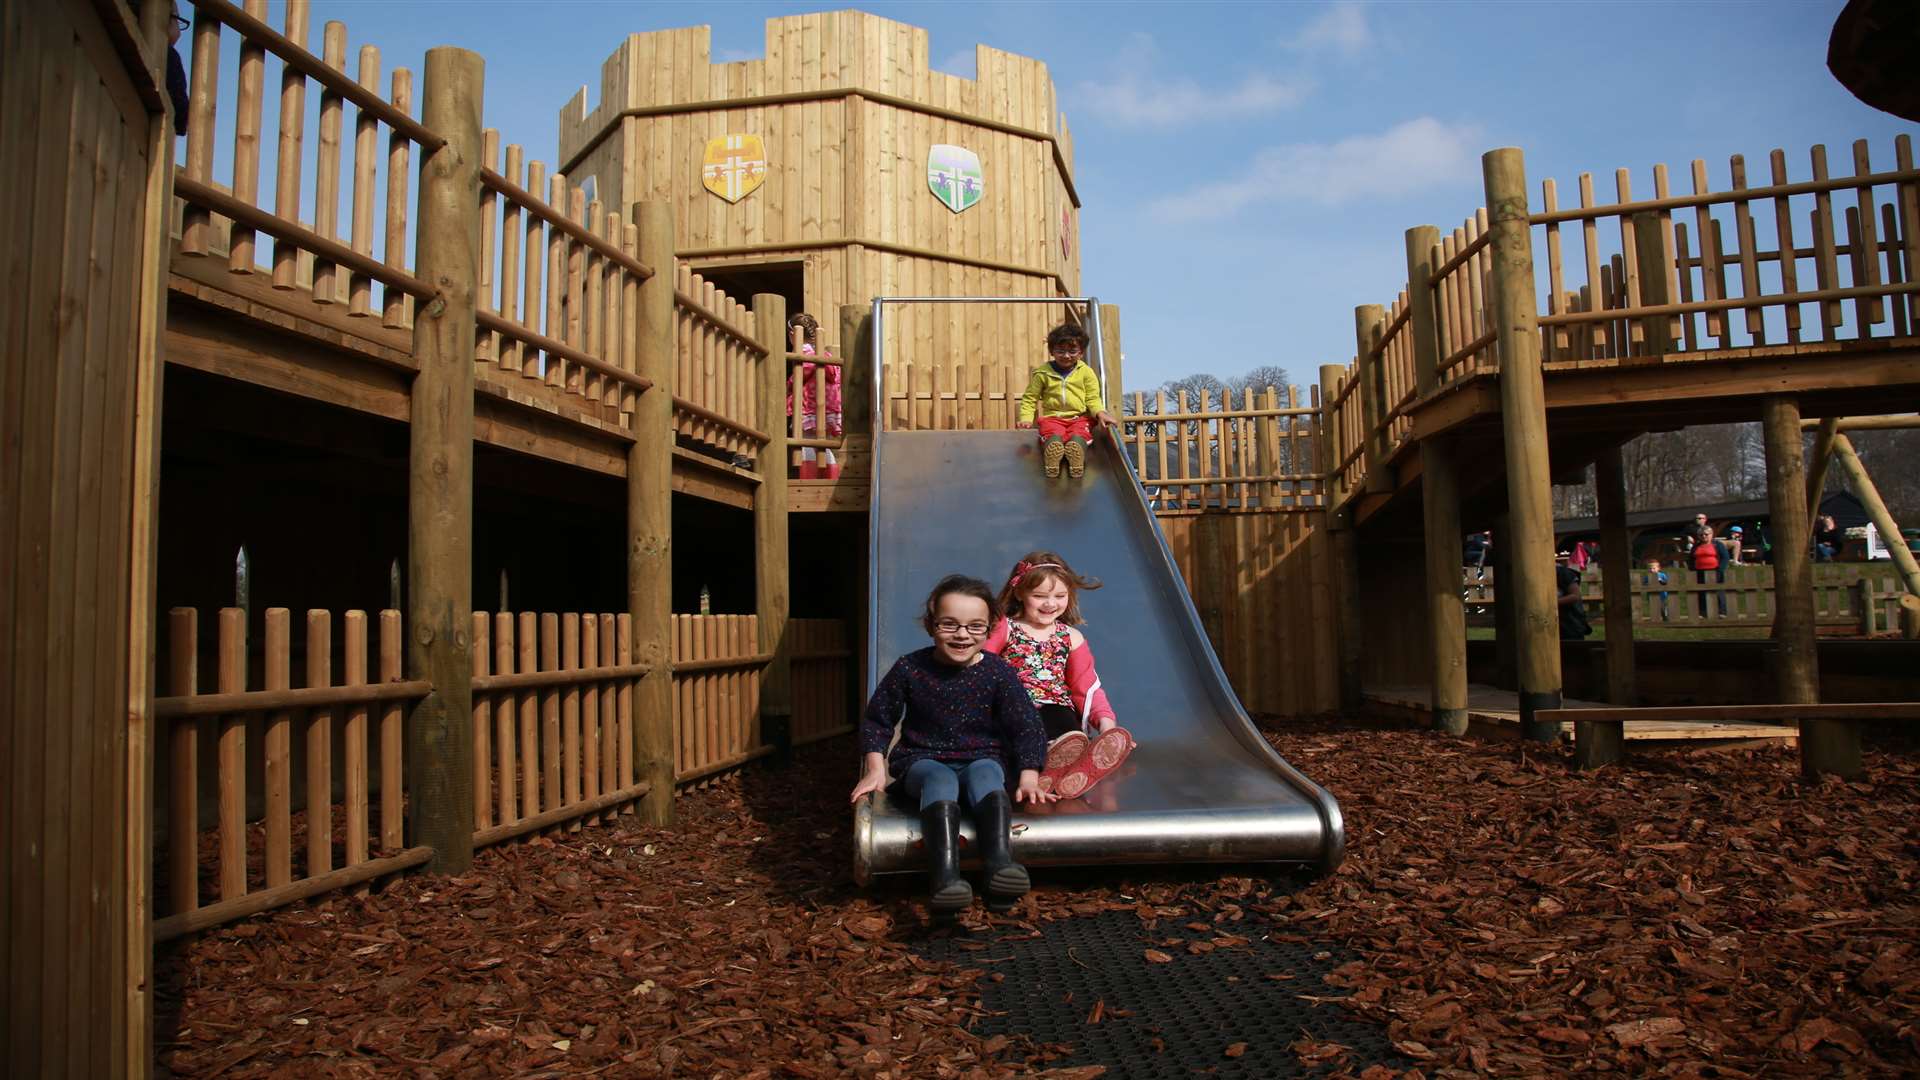 The playground is open all year round